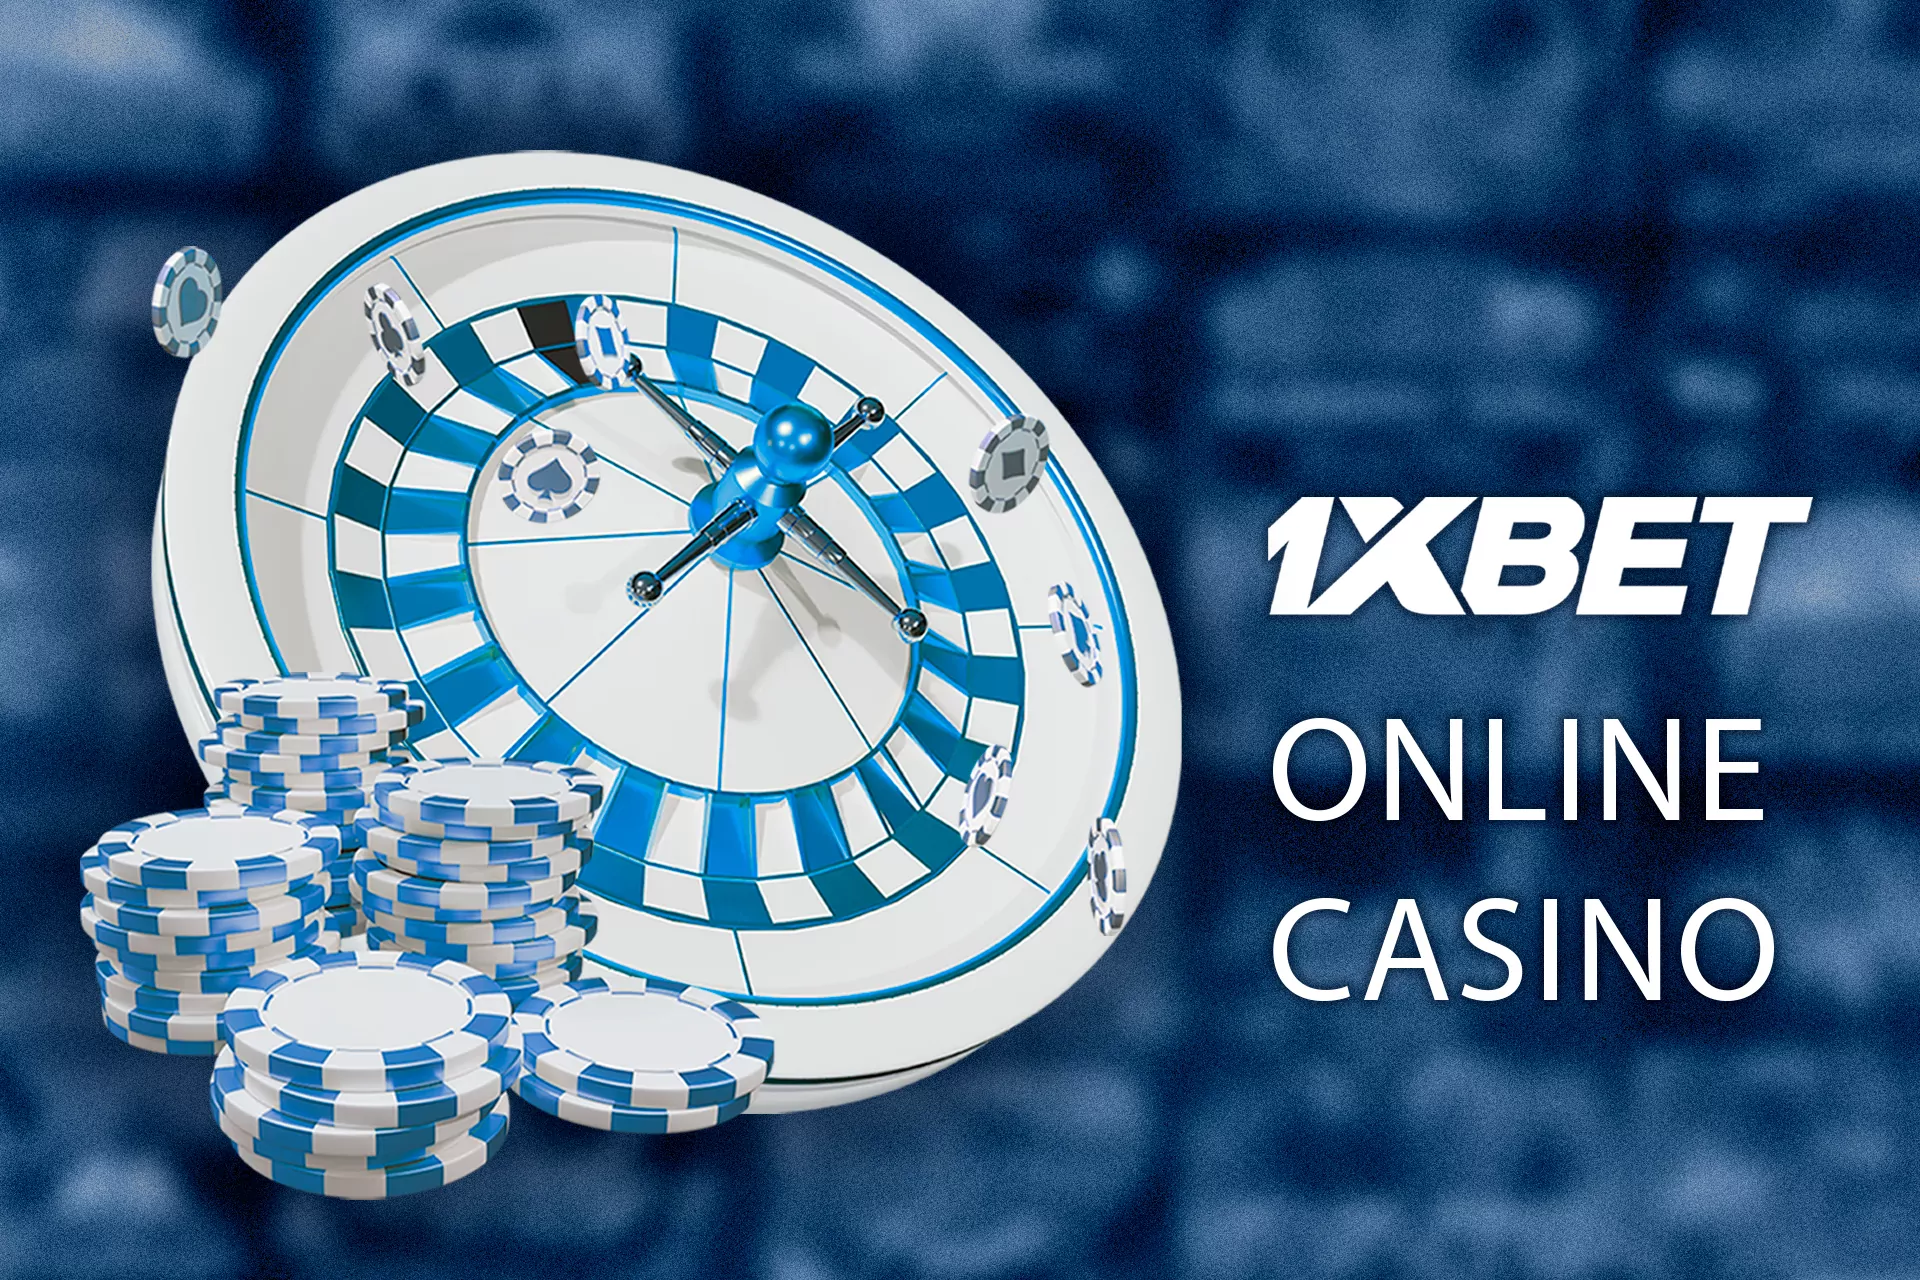 In the online casino 1xBet is available more than 200 games.